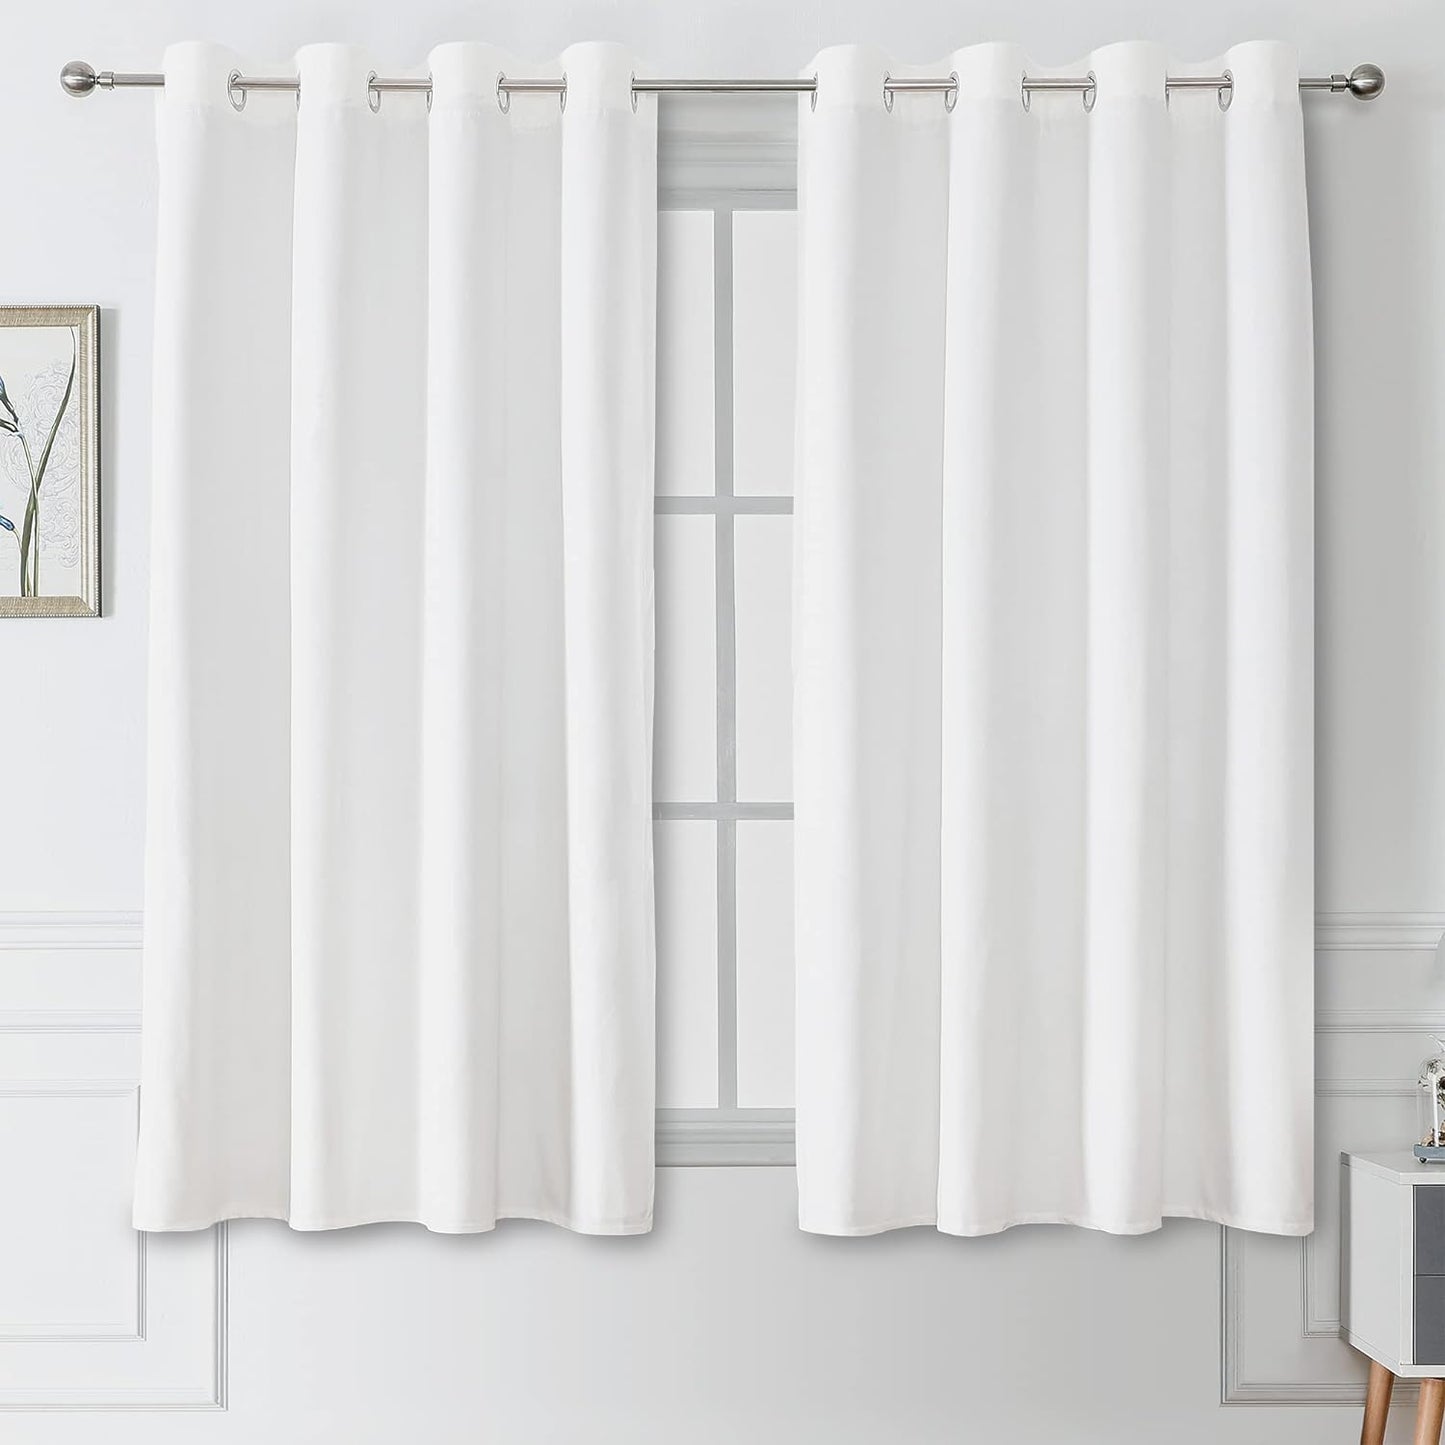 Victree Velvet Curtains for Bedroom, Blackout Curtains 52 X 84 Inch Length - Room Darkening Sun Light Blocking Grommet Window Drapes for Living Room, 2 Panels, Navy  Victree Bleach White 52 X 63 Inches 